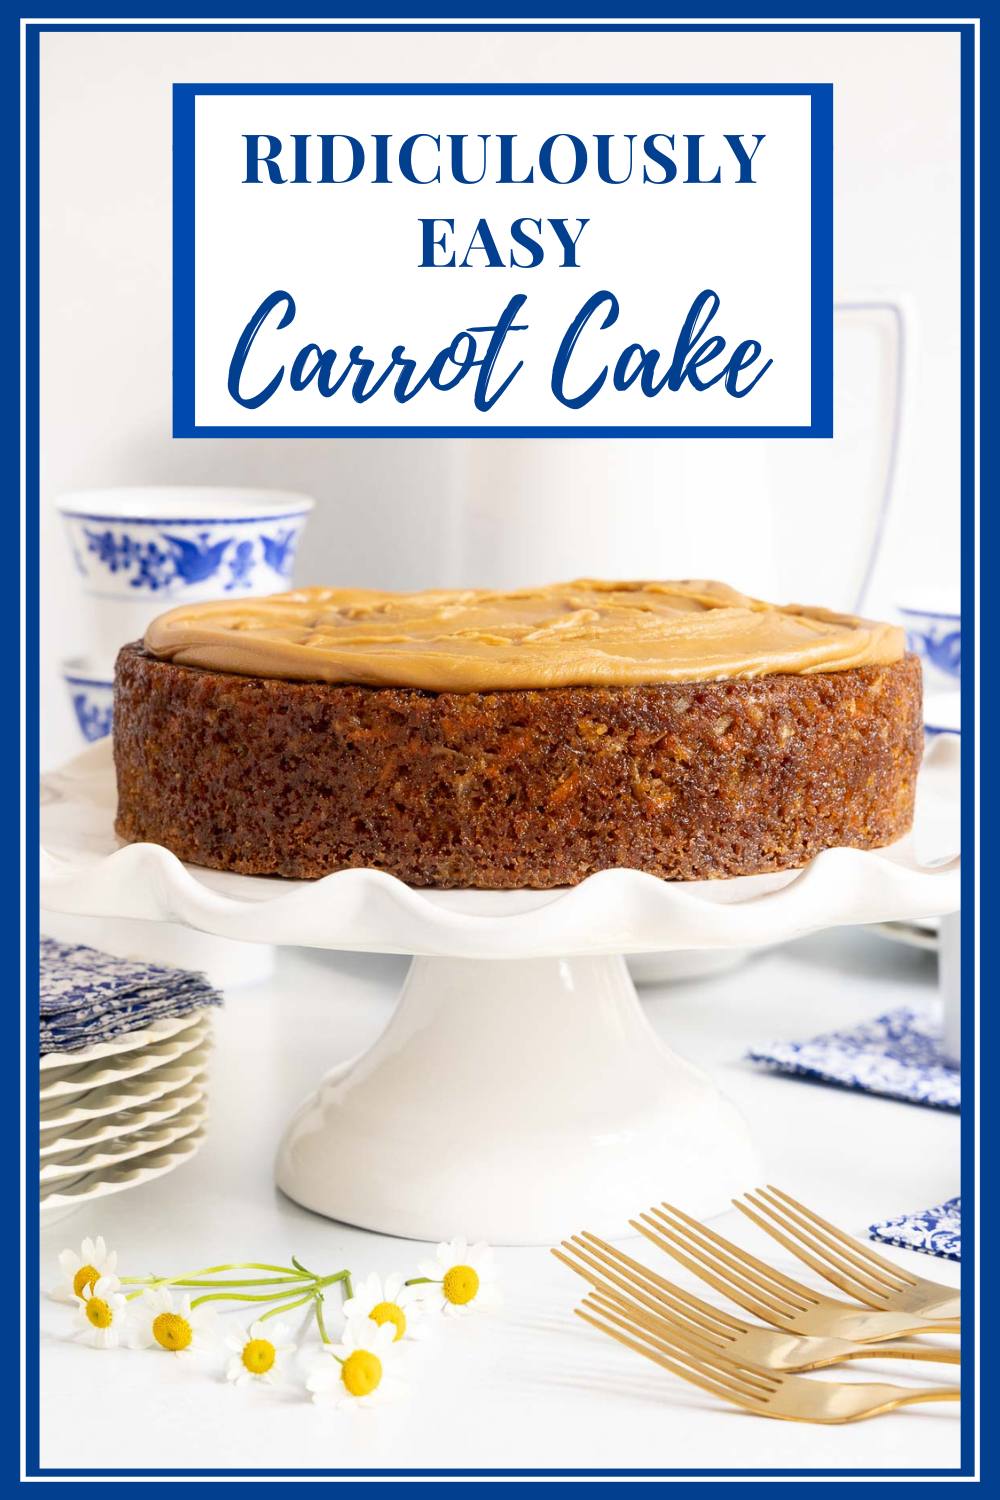 Ridiculously Easy Carrot Cake Recipe - Enjoy One, Give One Away!